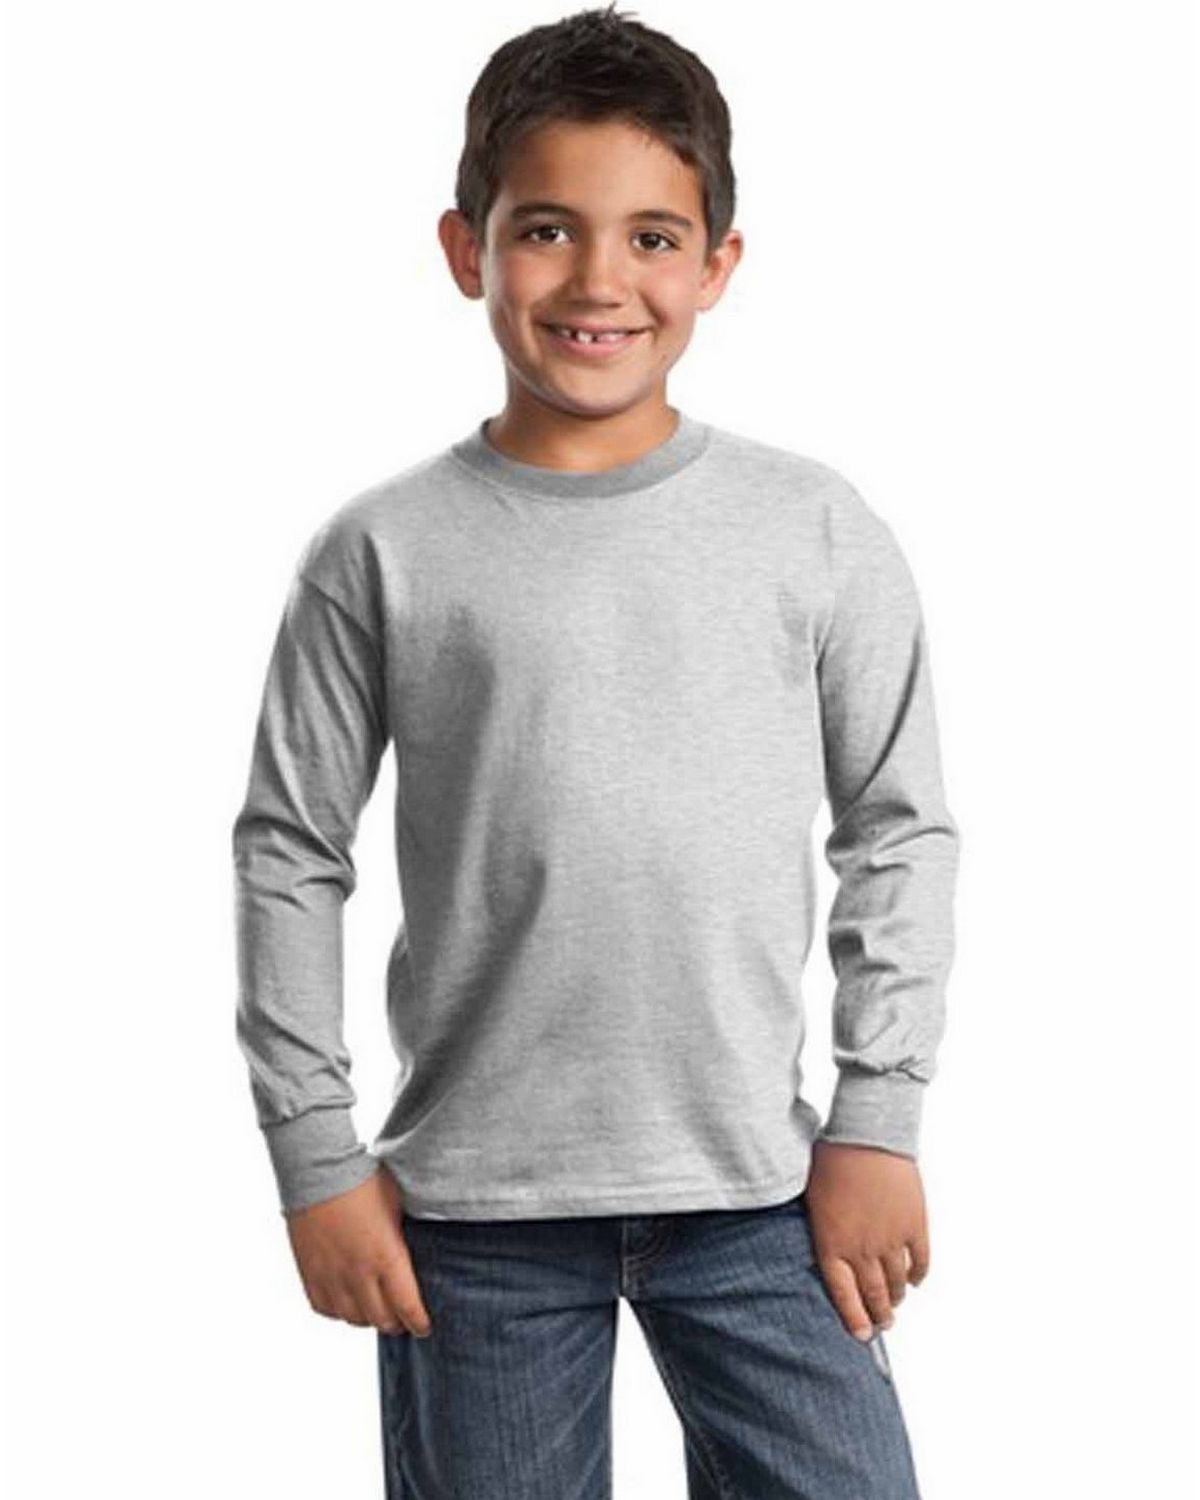 Buy Port & Company PC61YLS Youth Long-Sleeve Essential T-Shirt